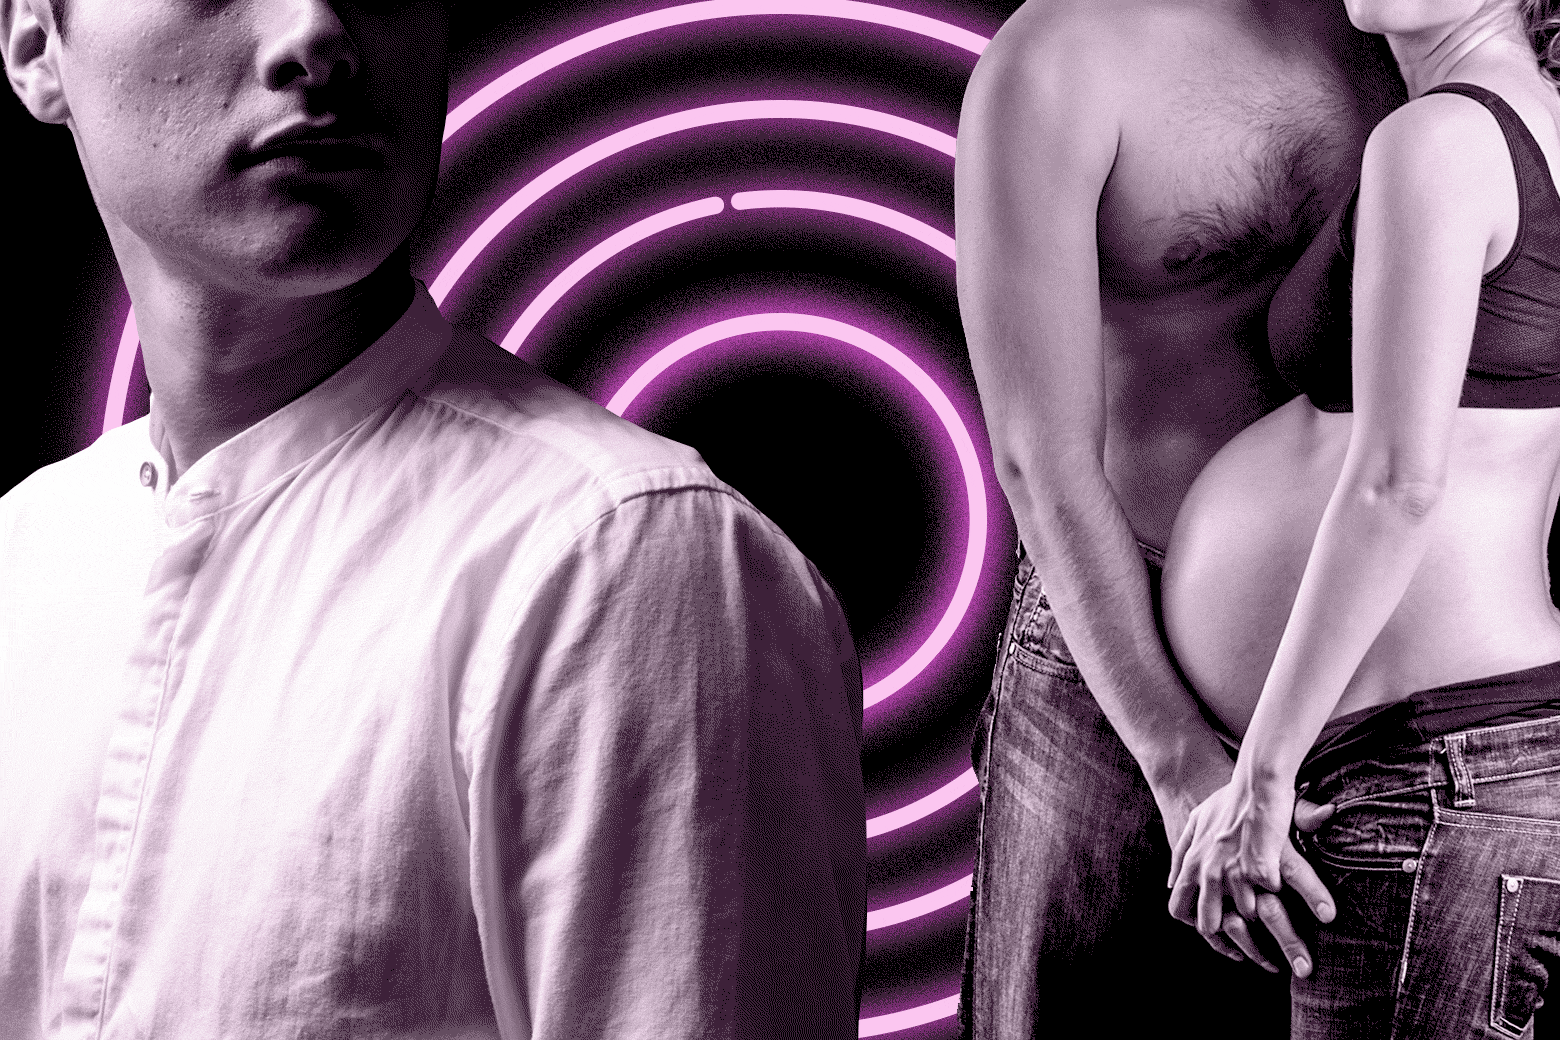 Collage of a man looking wistfully back at a pregnant couple in front of a neon circle.